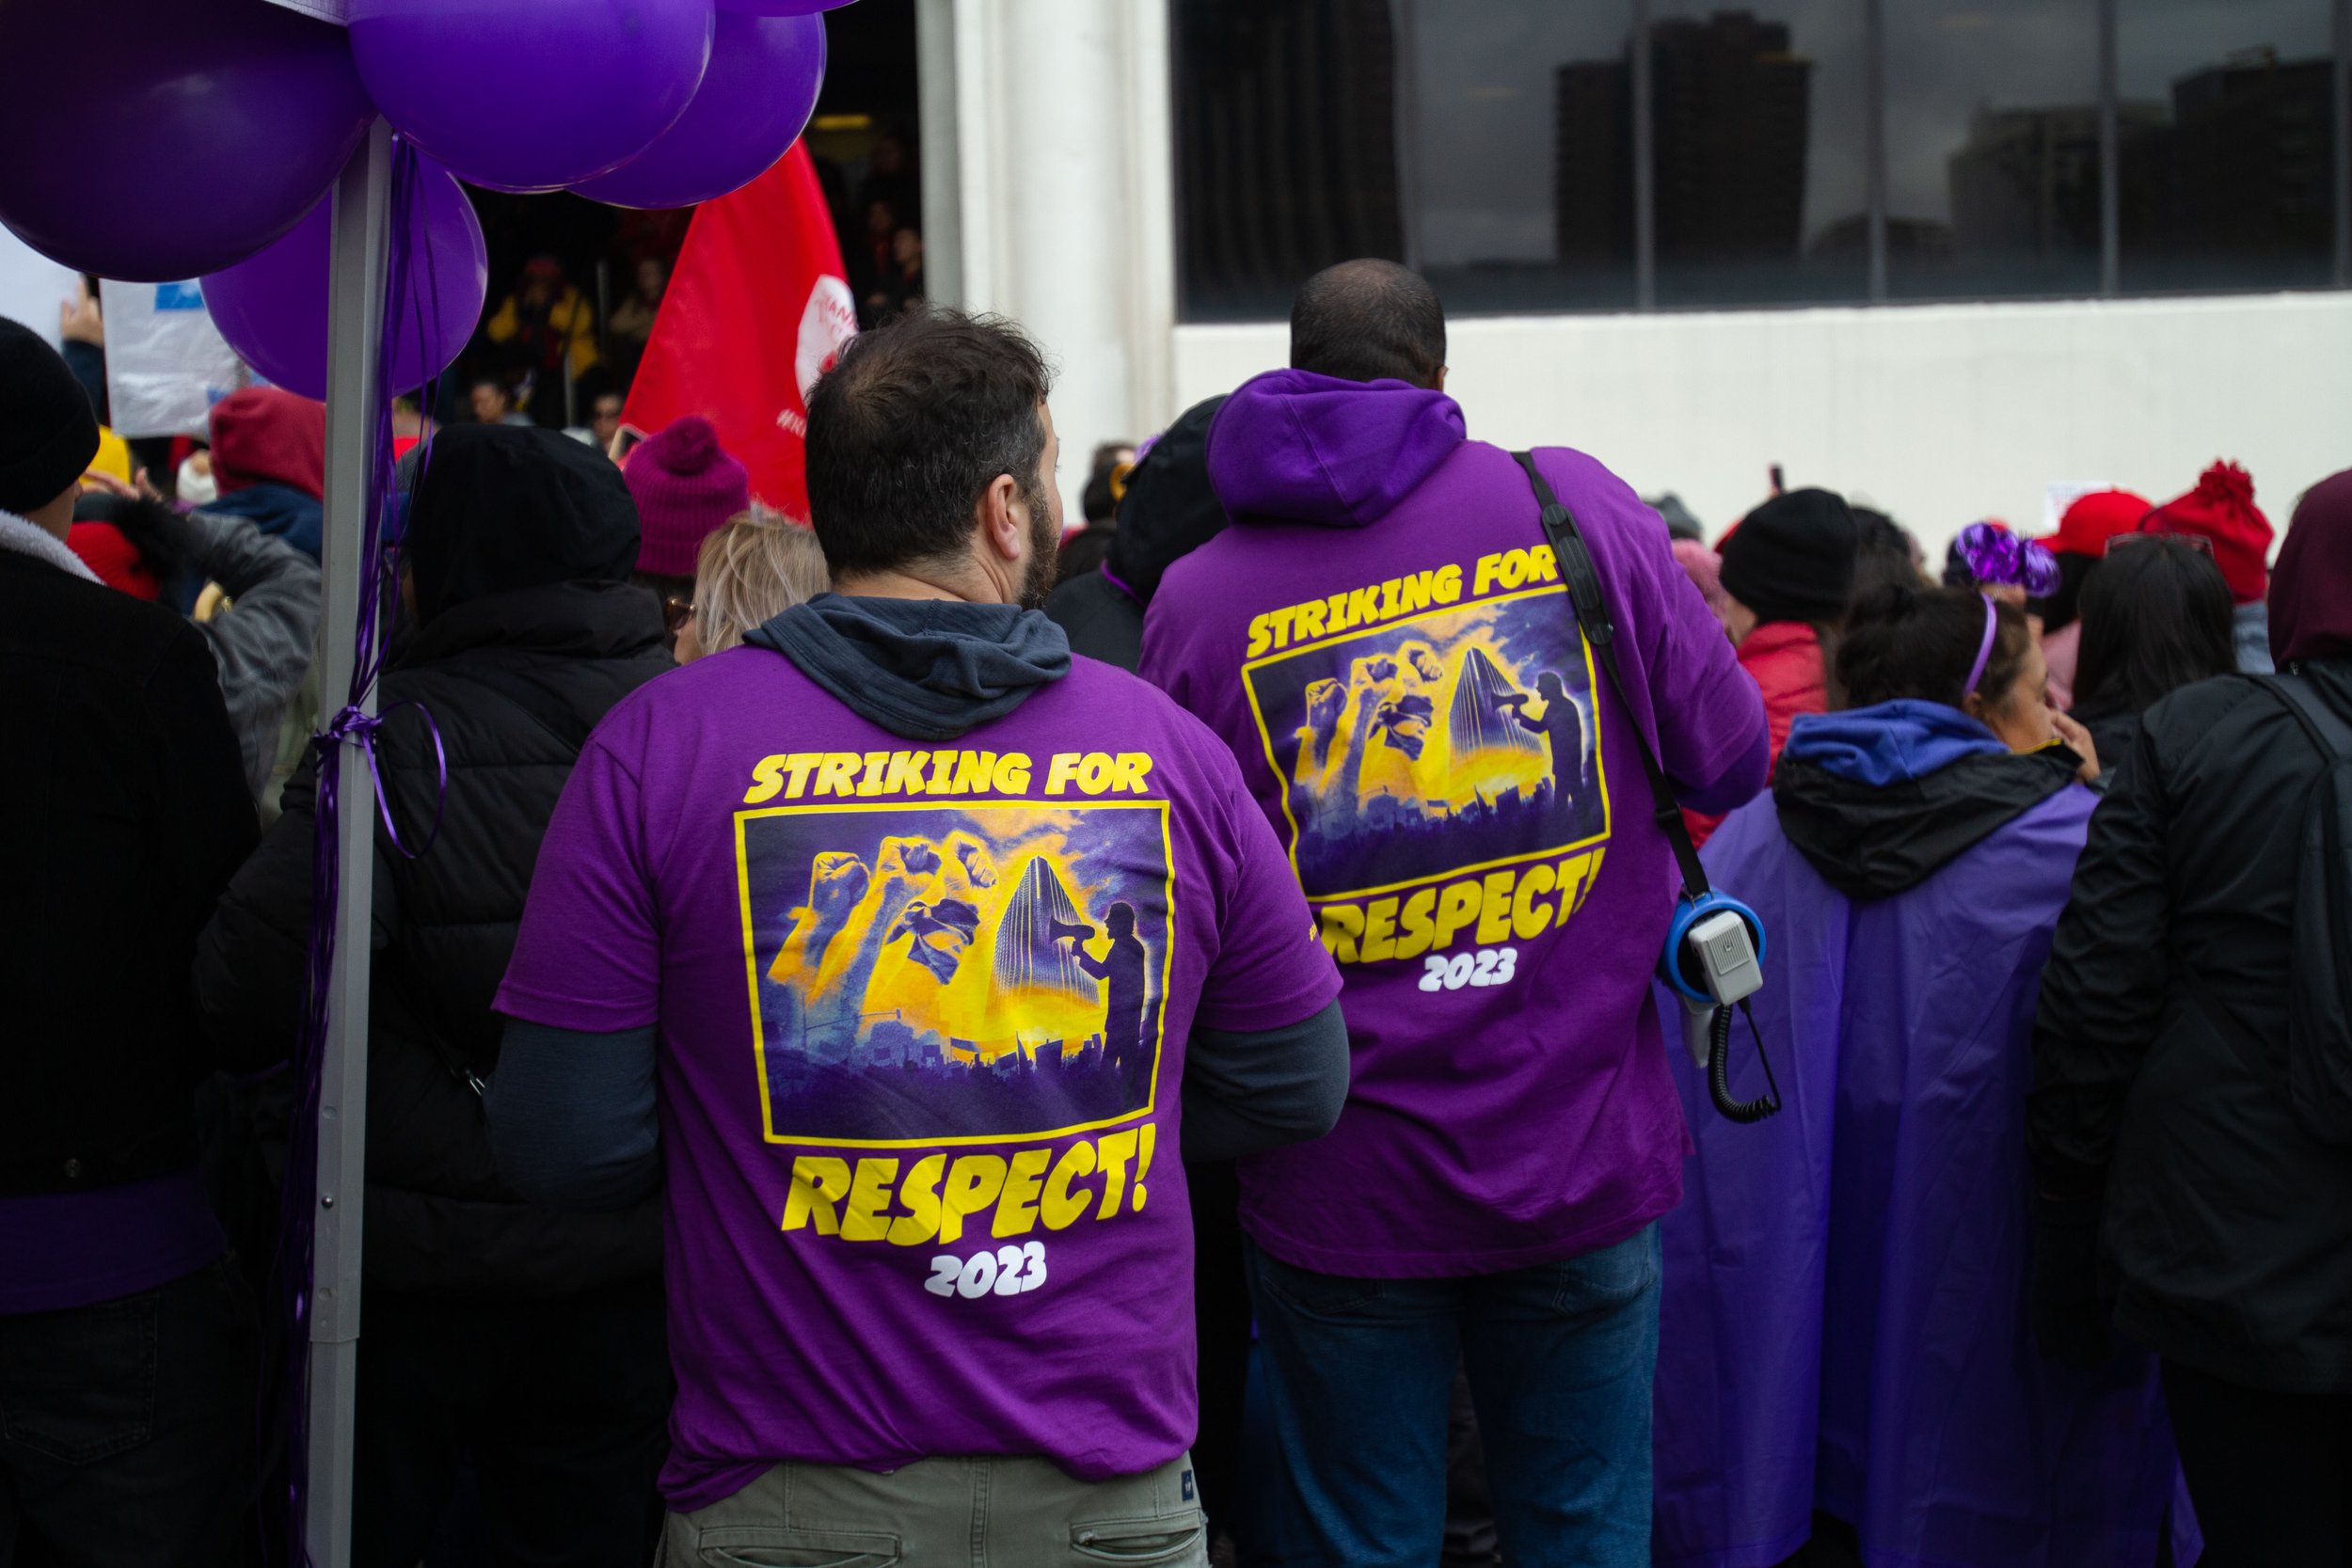  Los Angeles Unified School District SEIU Local 99 organized a 3 day strike, starting on Tuesday, March 21, 2023 at the LAUSD headquarters in Downtown L.A. The strike is being lead by SEIU Local 99 members protesting unfair labor practices. (Baleigh 